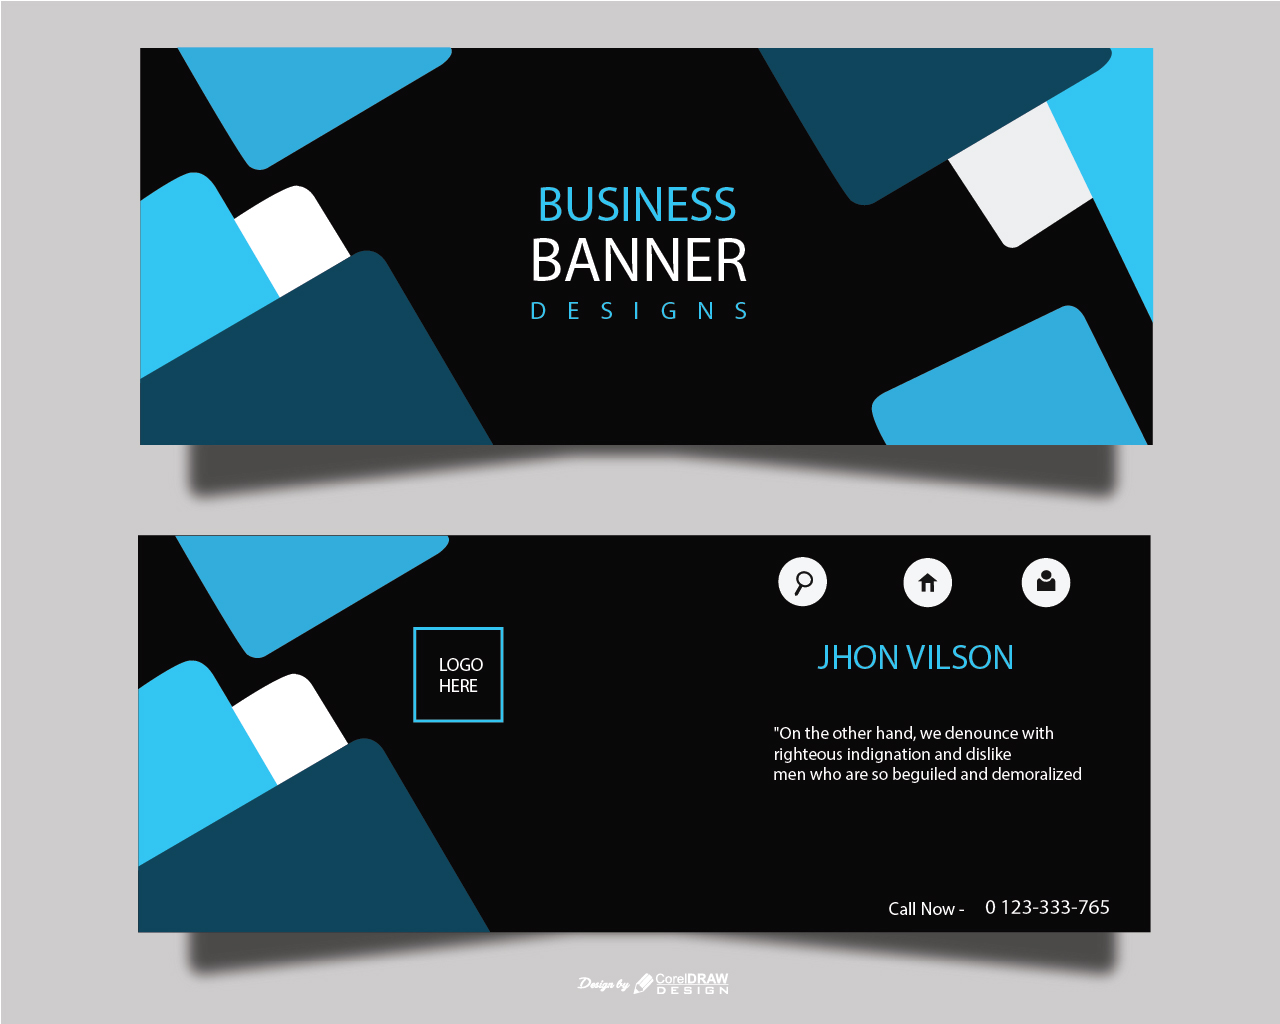 White cards Vectors & Illustrations for Free Download